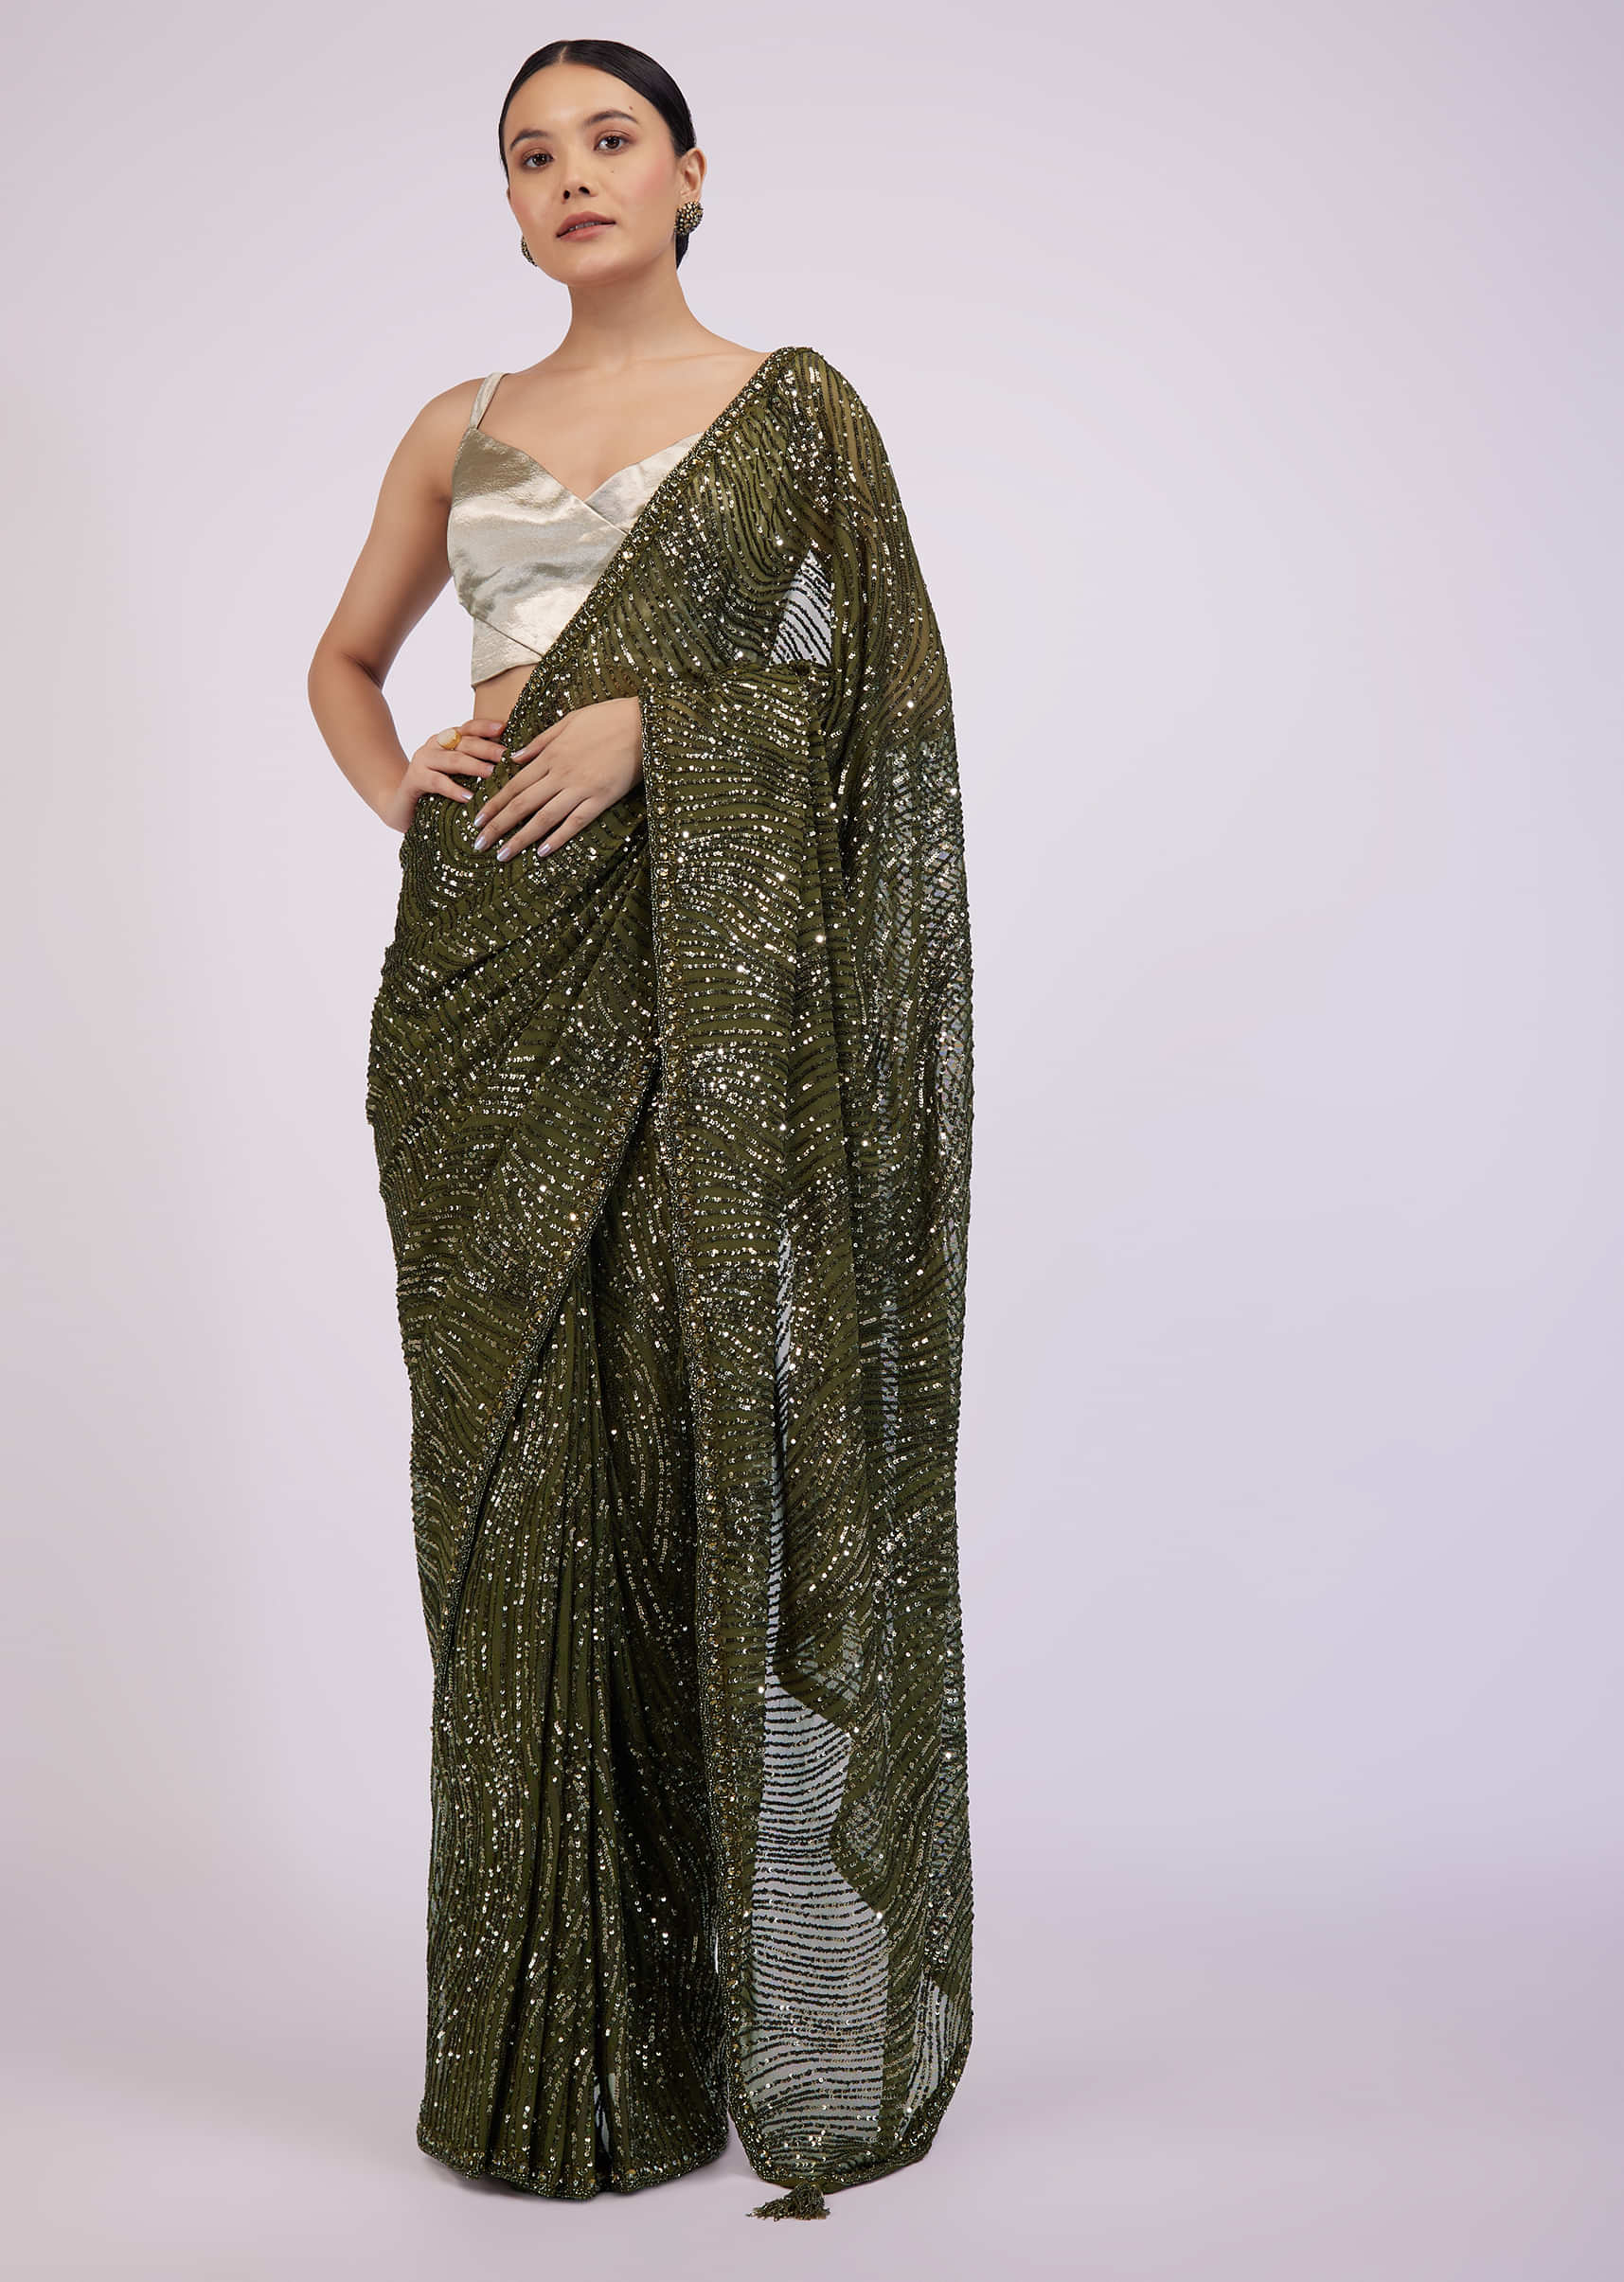 Army Green Saree In Sequins With Embroidery